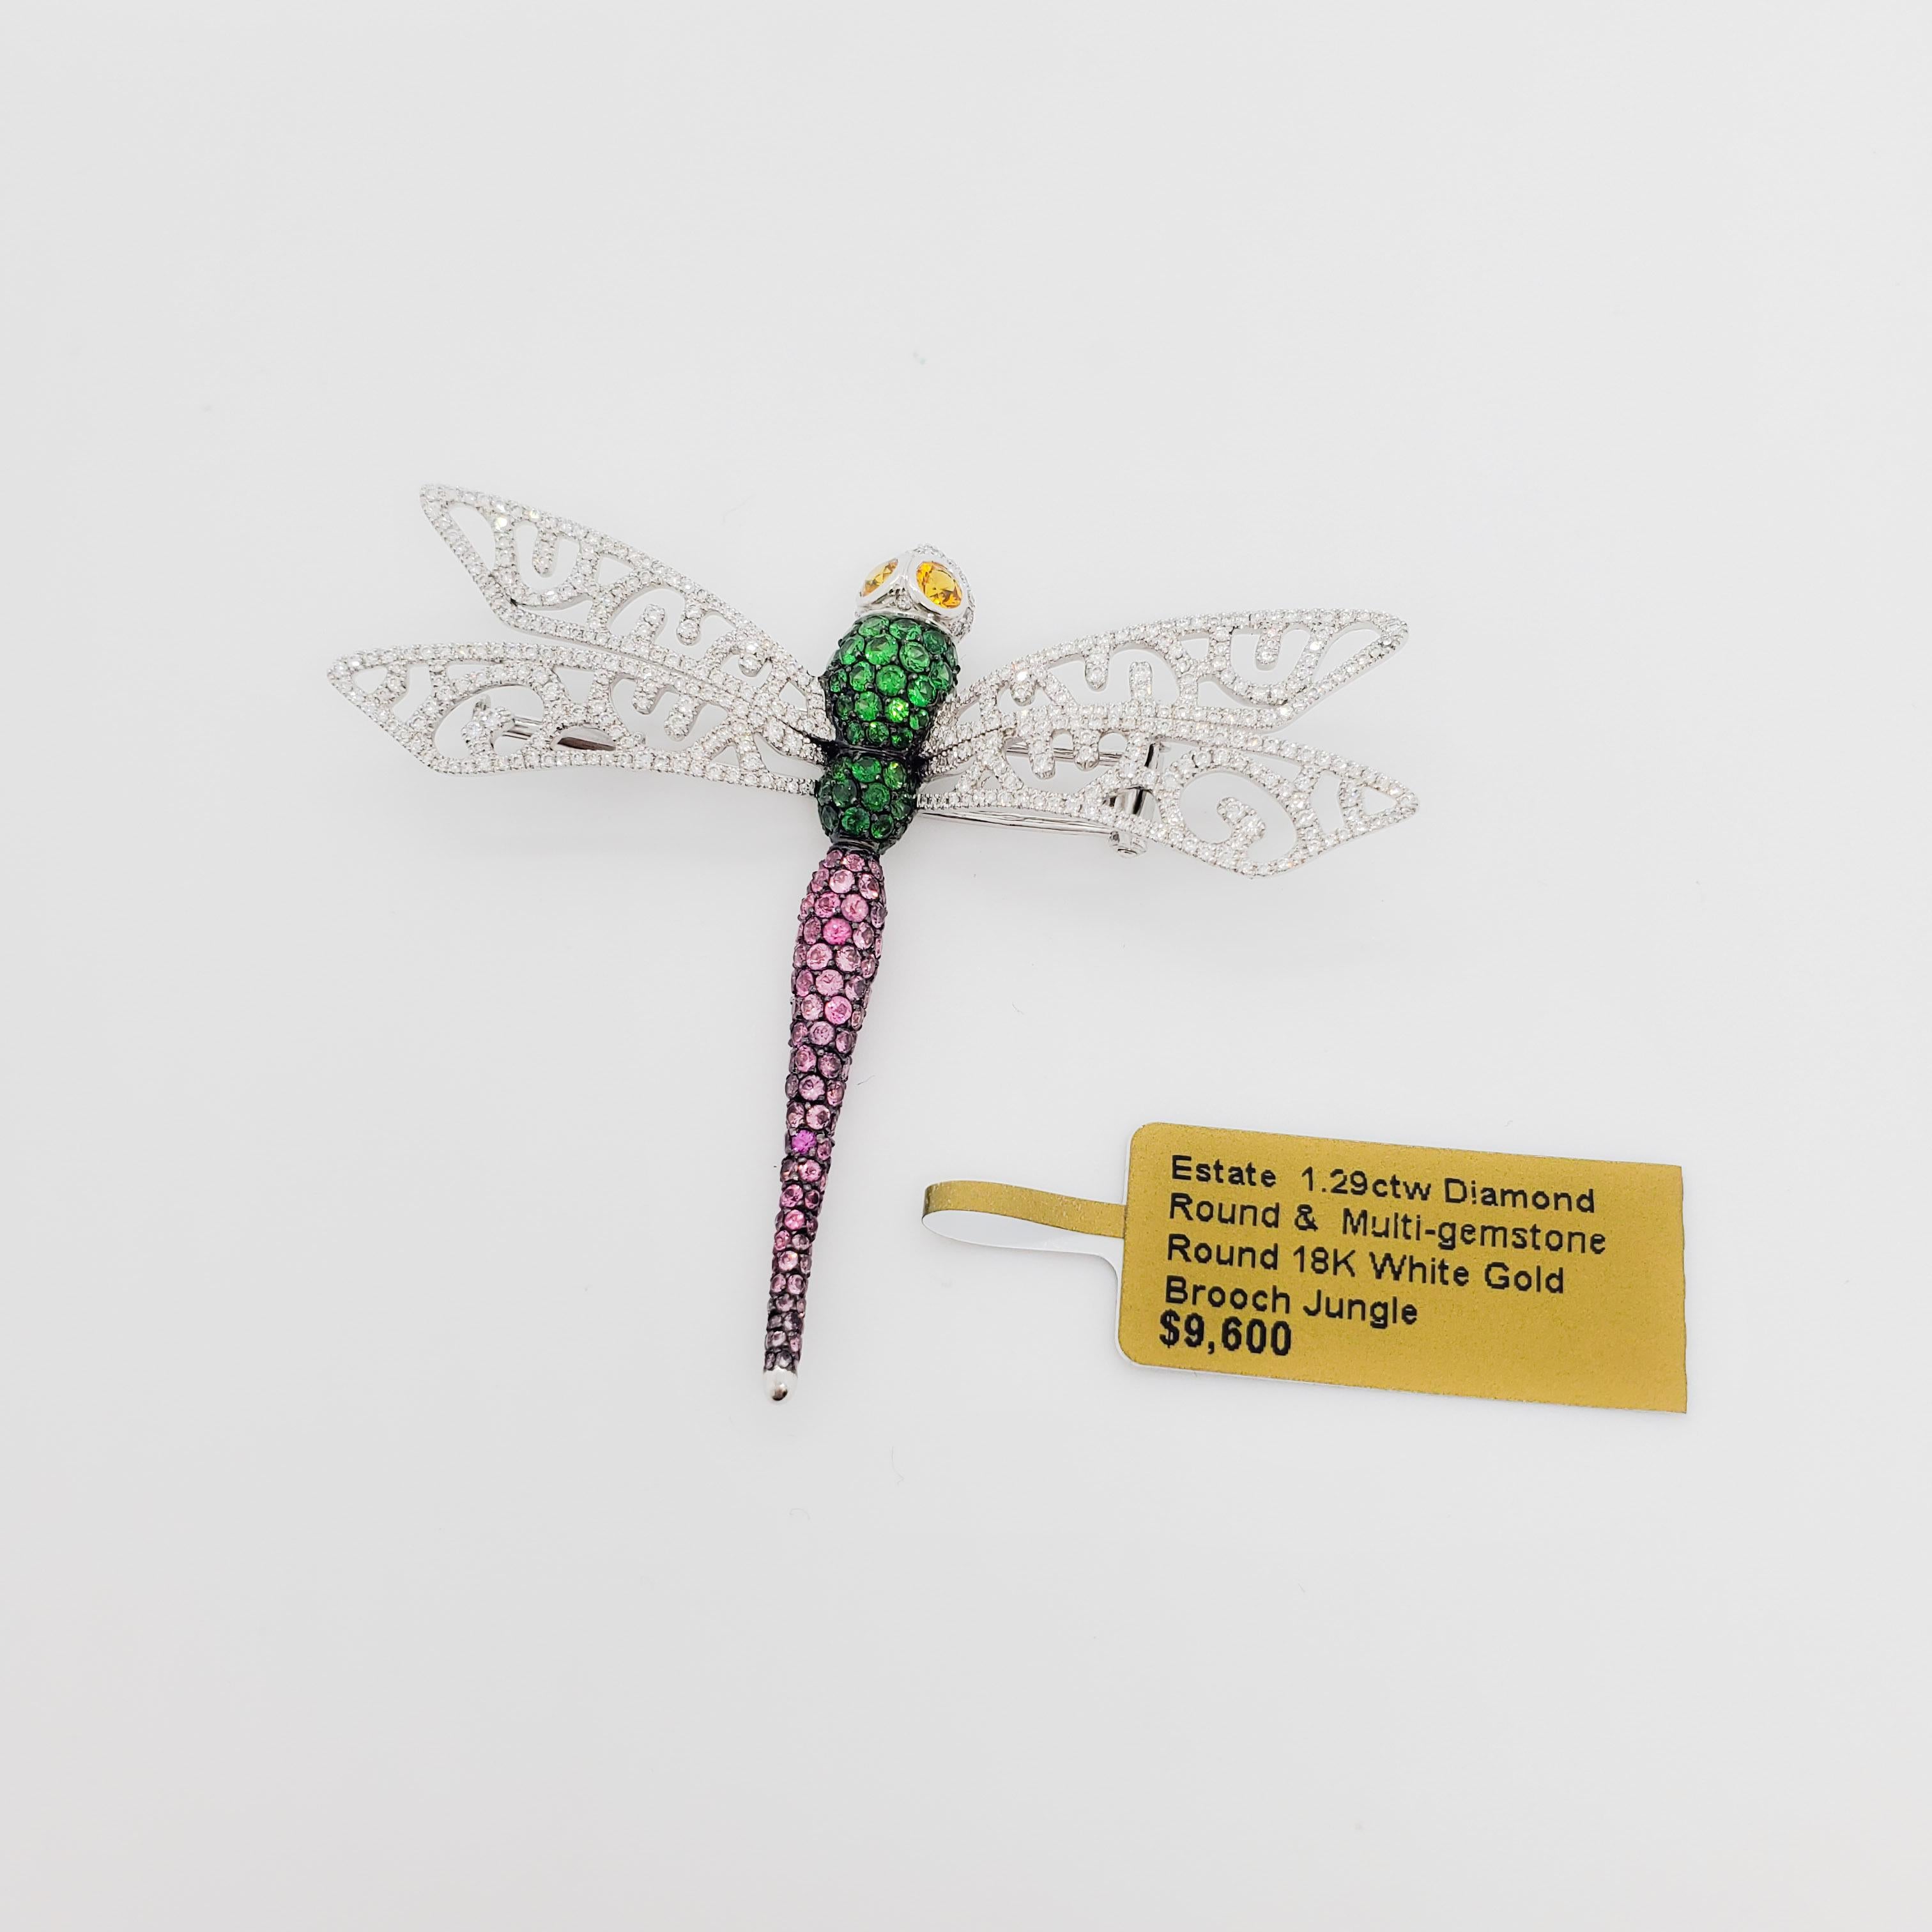 Women's or Men's Estate Diamond and Gemstone Dragonfly Brooch in 18k White Gold